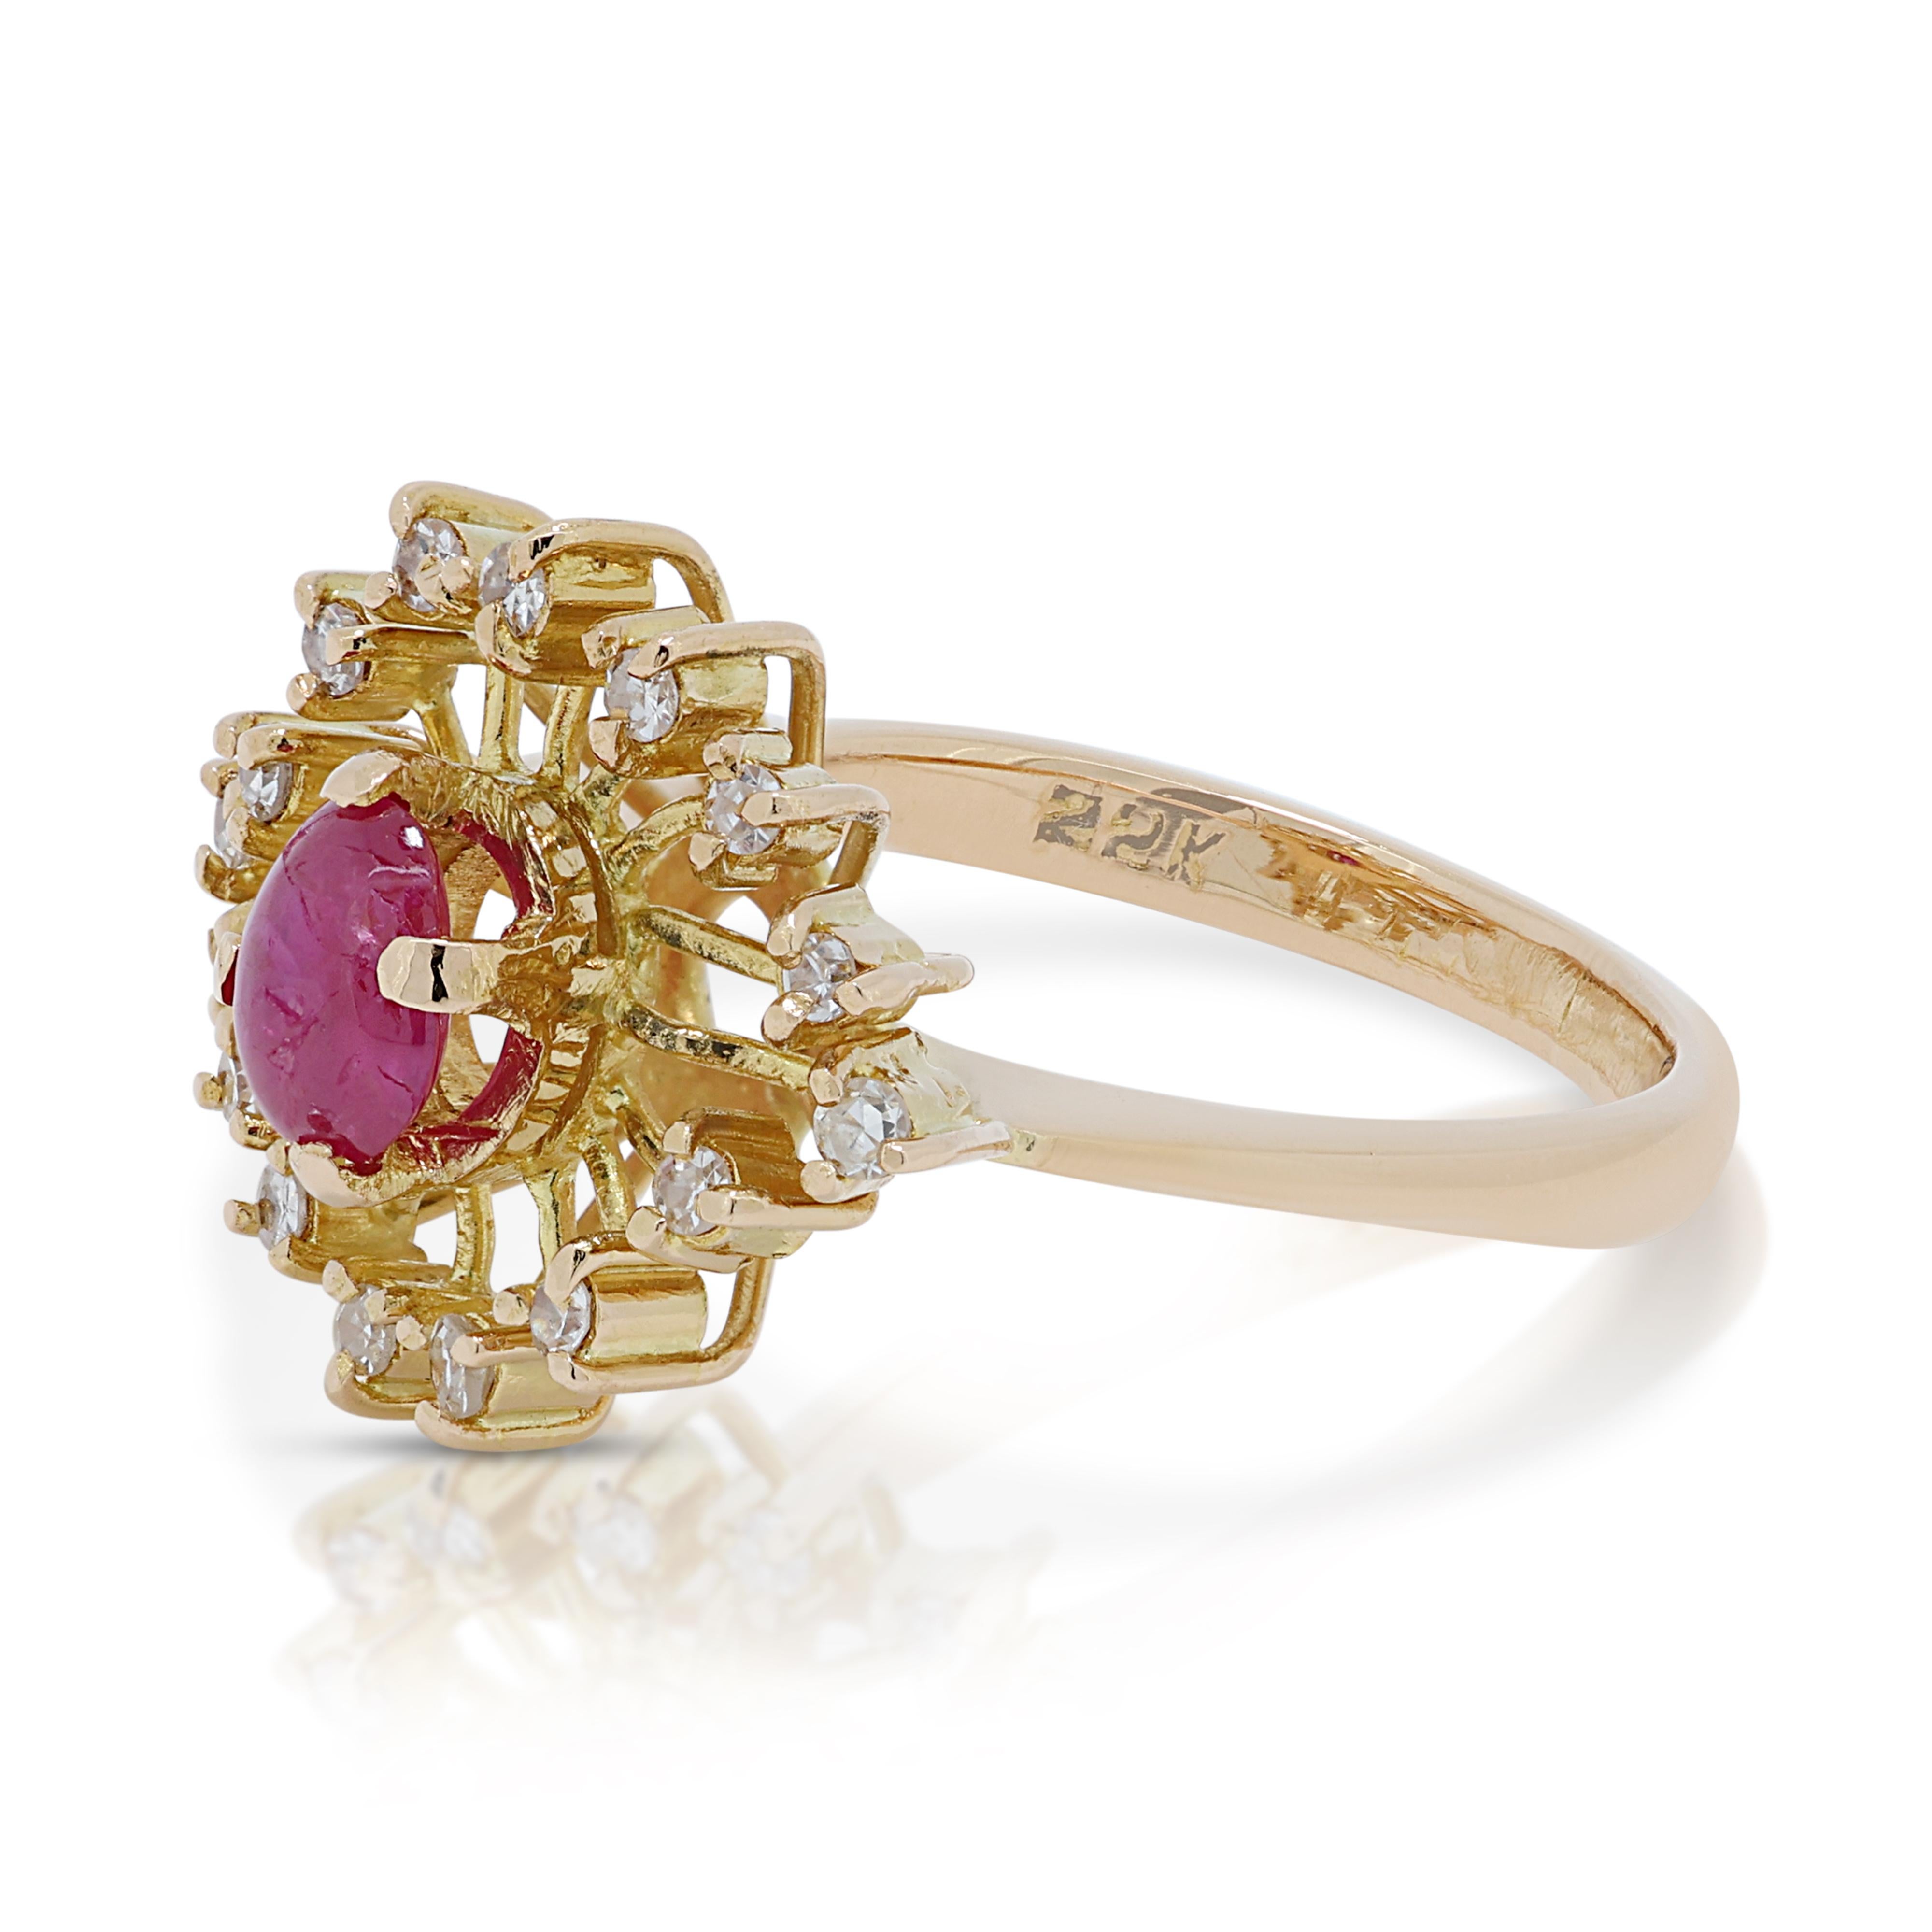 Captivating 0.45ct Tourmaline Cluster Ring in 22K Yellow Gold with Diamonds In Excellent Condition For Sale In רמת גן, IL